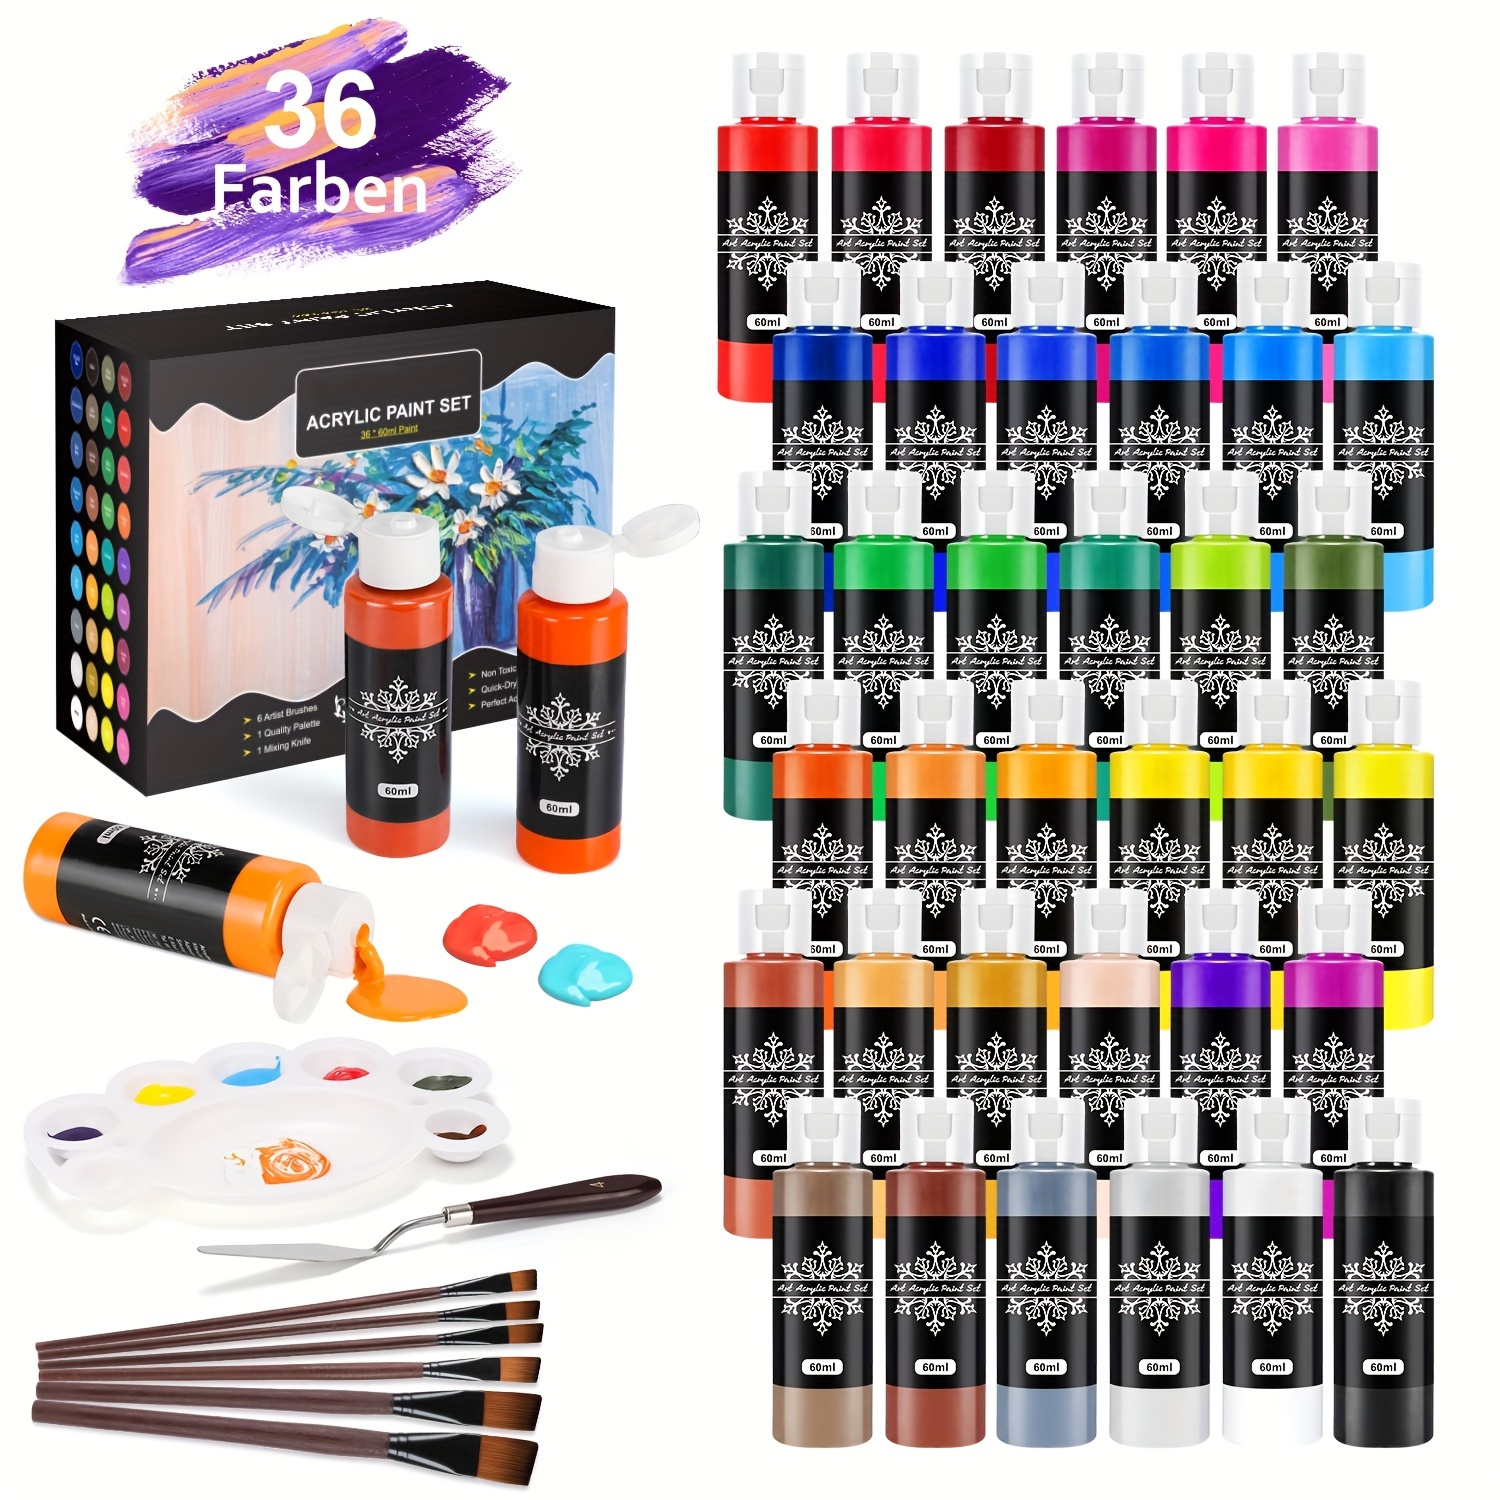 XDOVET Airbrush Paint, 18 Colors Airbrush Paint Set (30 ml/1 oz), Ready to  Spray, Opaque & Neon Colors, Water-Based, Premium Acrylic Airbrush Paint